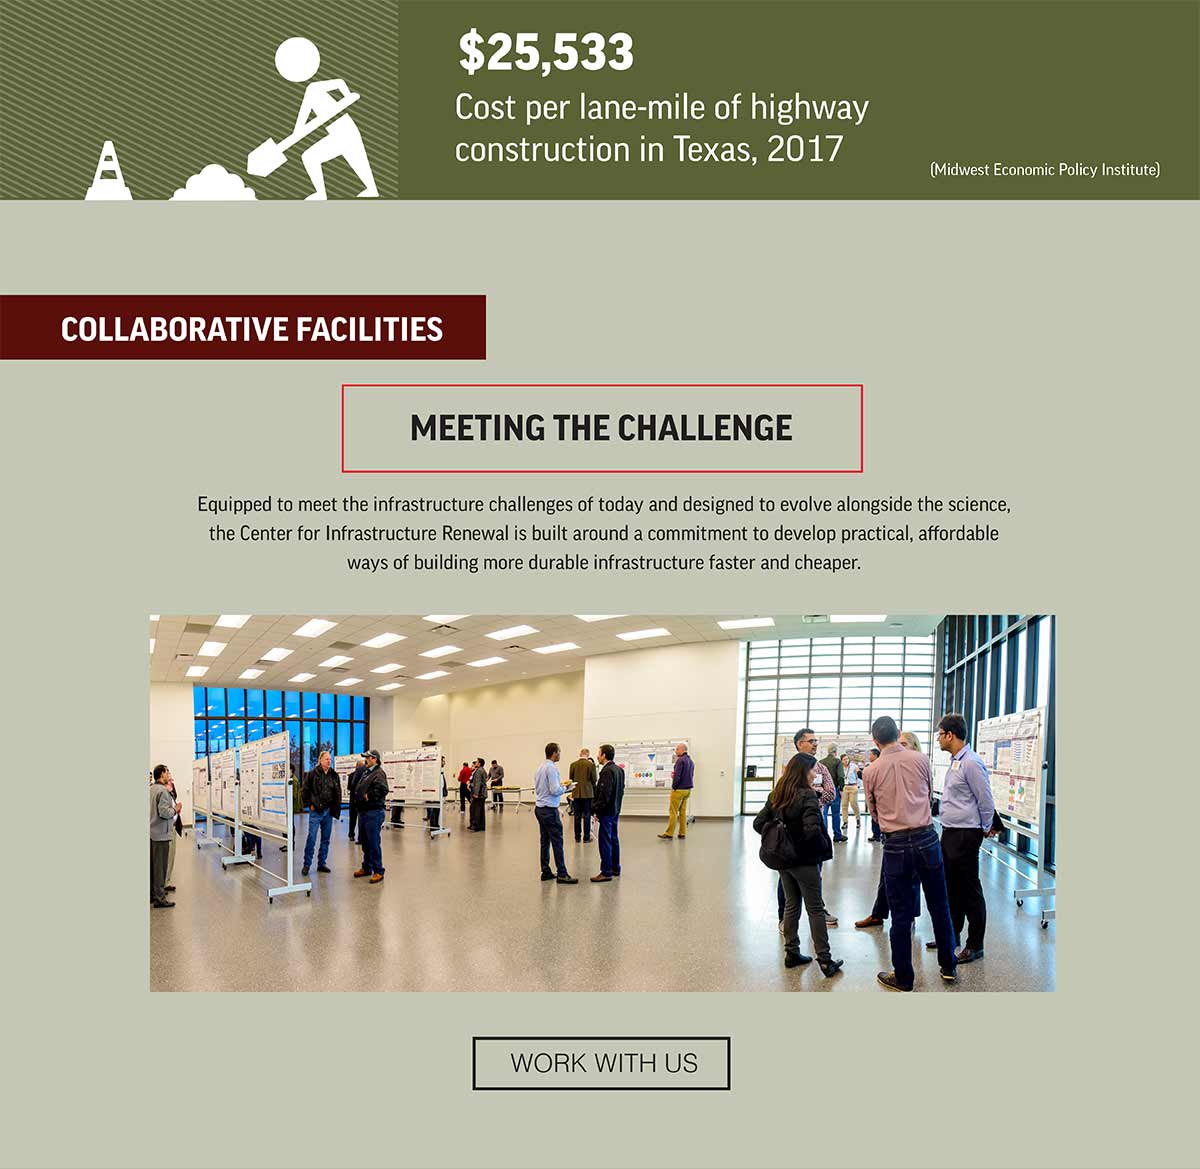 $25,533 cost per lane-mile of highway construction in Texas, 2017 - Collaborative Facilities - meeting the challenge, work with us